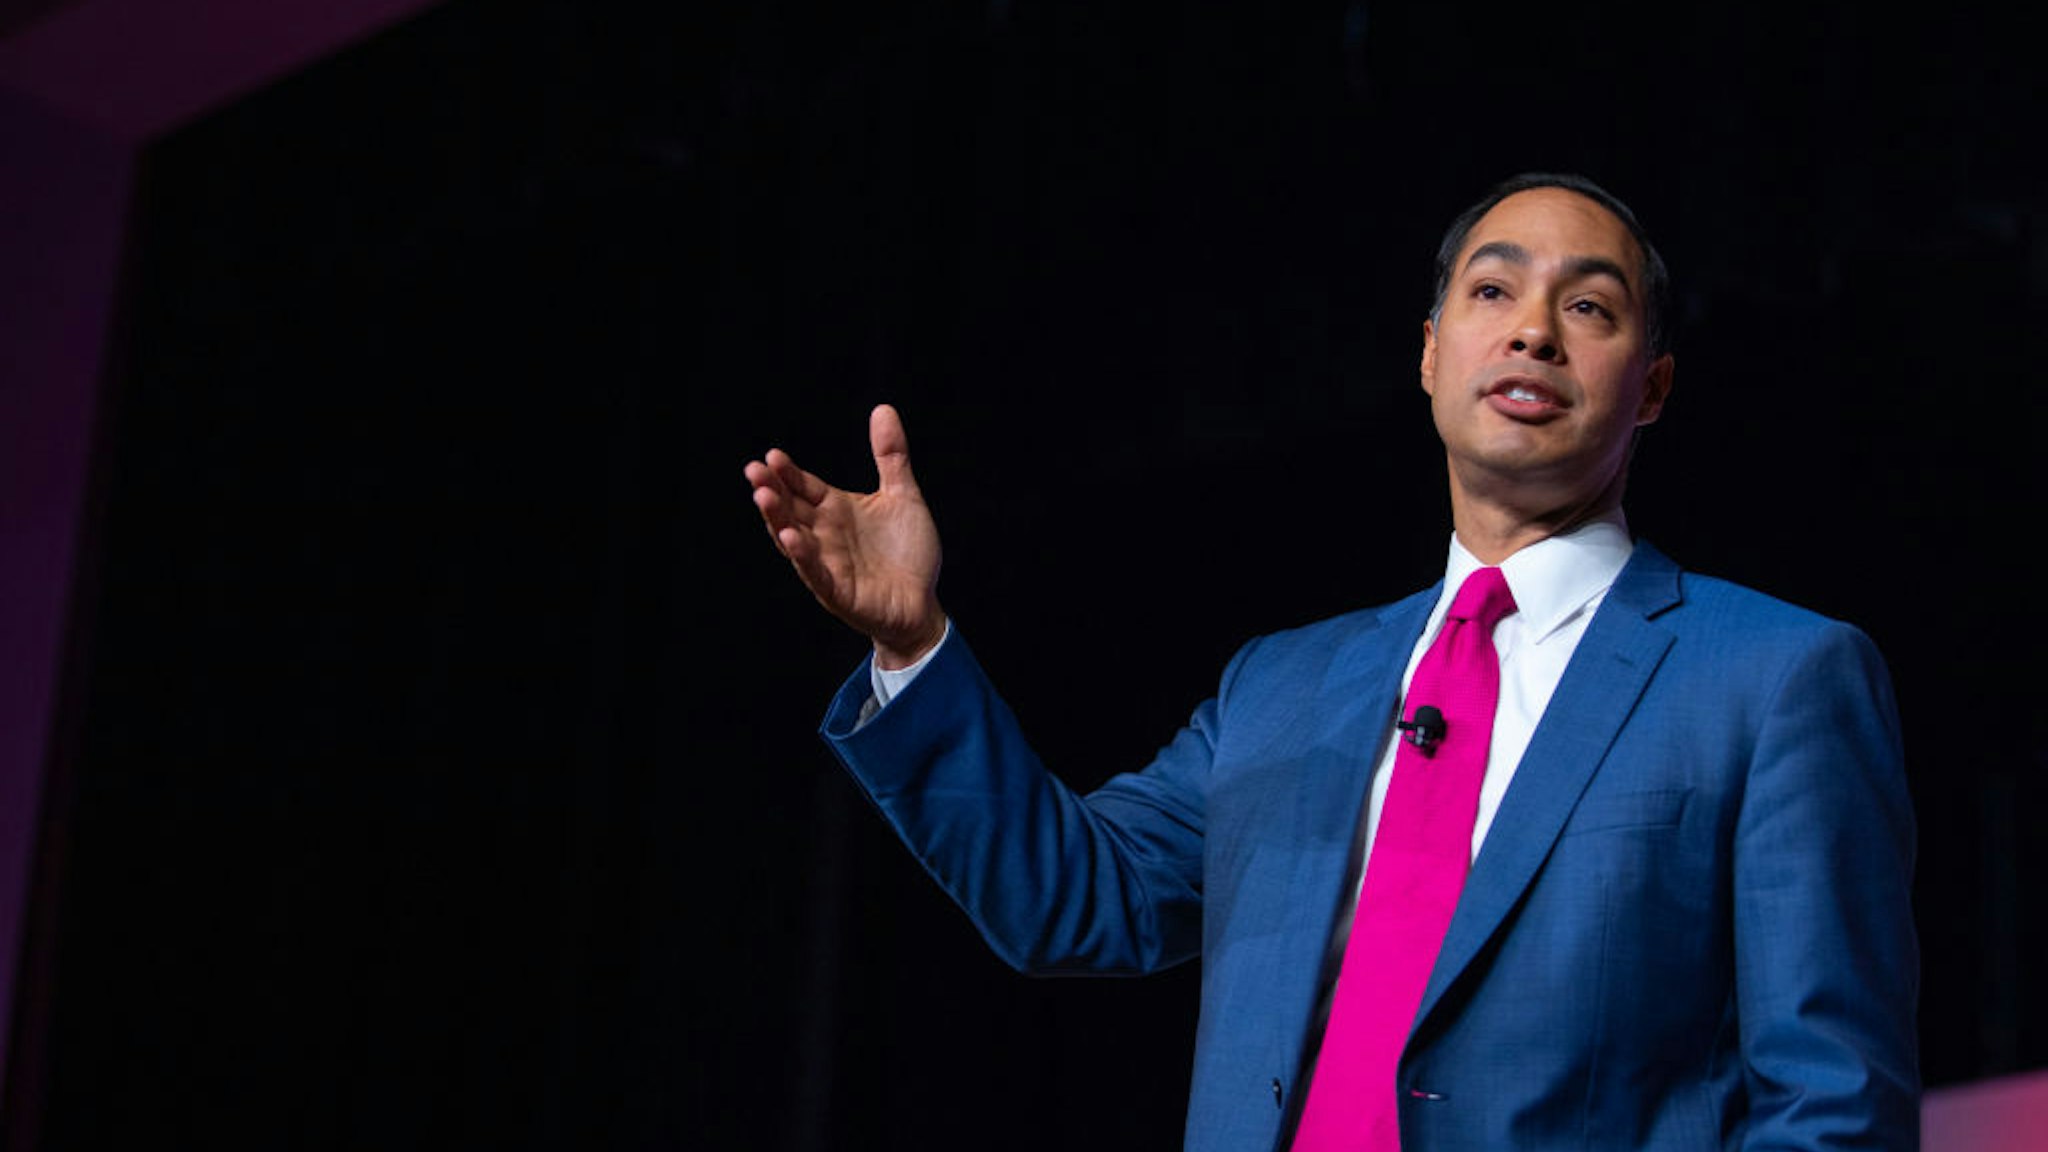 Julian Castro, former secretary of Housing and Urban Development (HUD) and 2020 Democratic presidential candidate, speaks during the Second Step Presidential Justice Forum at Benedict College in Columbia, South Carolina, U.S., on Sunday, Oct. 27, 2019. The forum asked Democratic presidential candidates to present their criminal justice reform platforms now that the First Step Act has been passed.